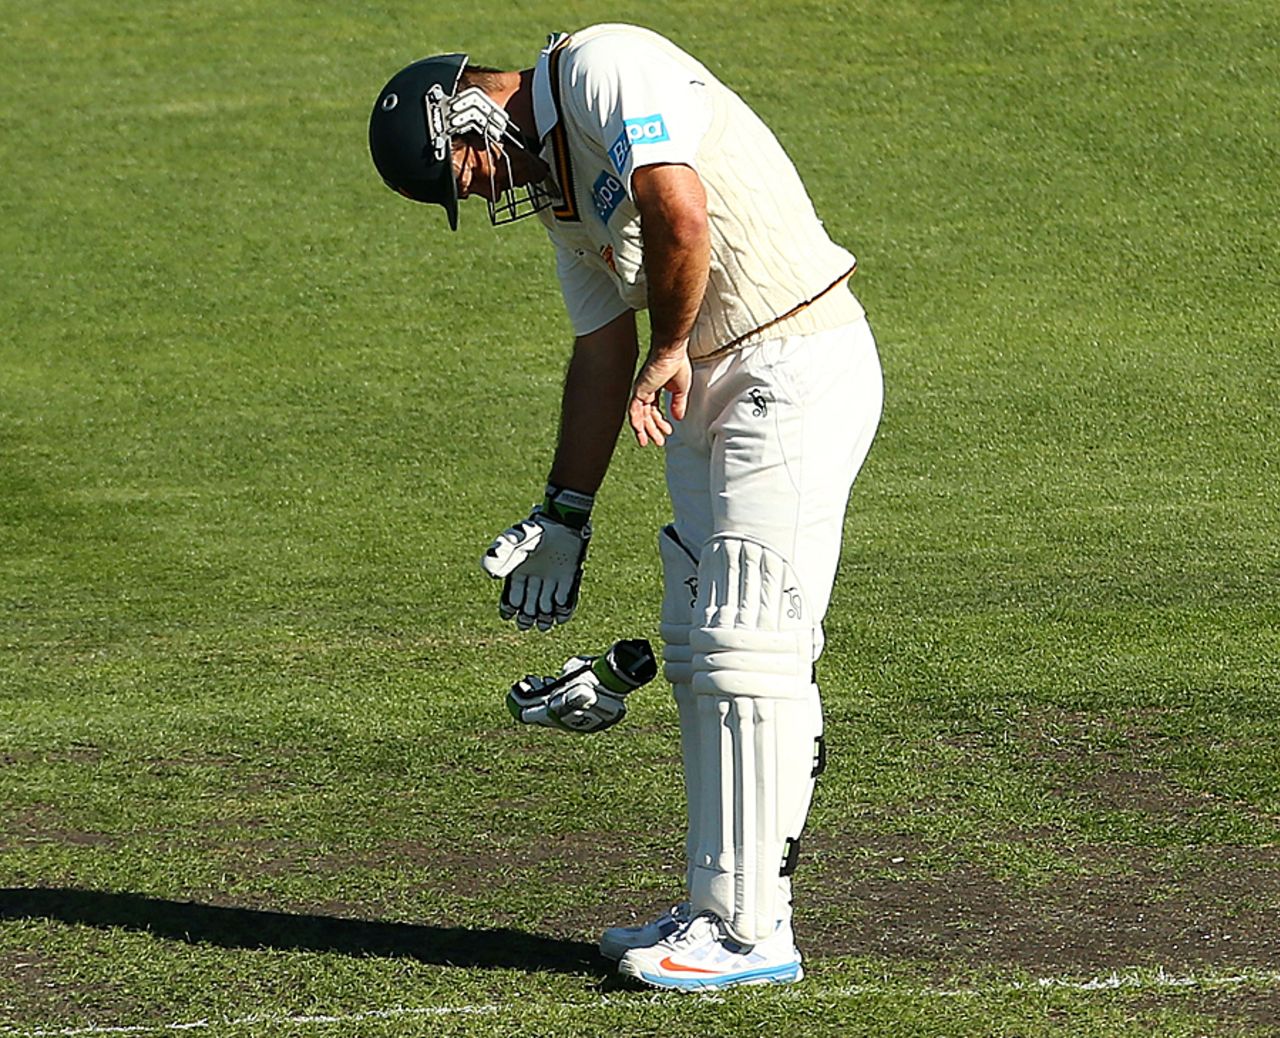 Ricky Ponting looks at his hand after being struck by a delivery, Tasmania v Victoria, Sheffield Shield, Hobart, 1st day, March 14, 2013